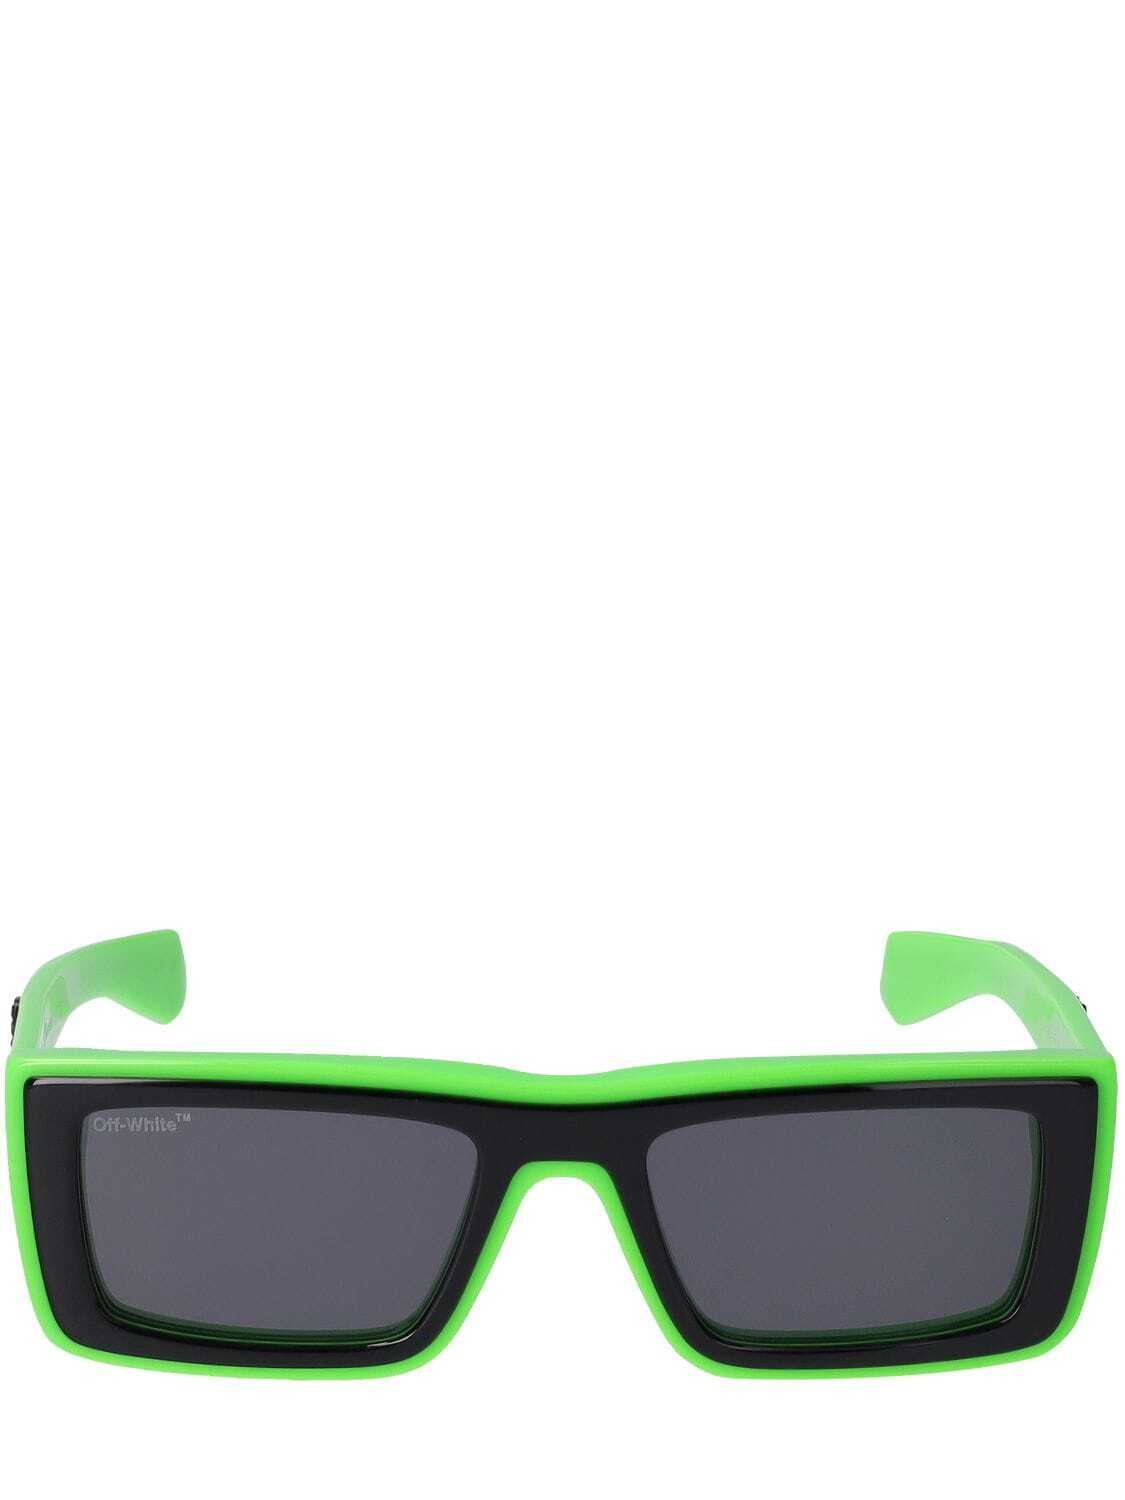 OFF-WHITE Jacob Squared Acetate Sunglasses in green